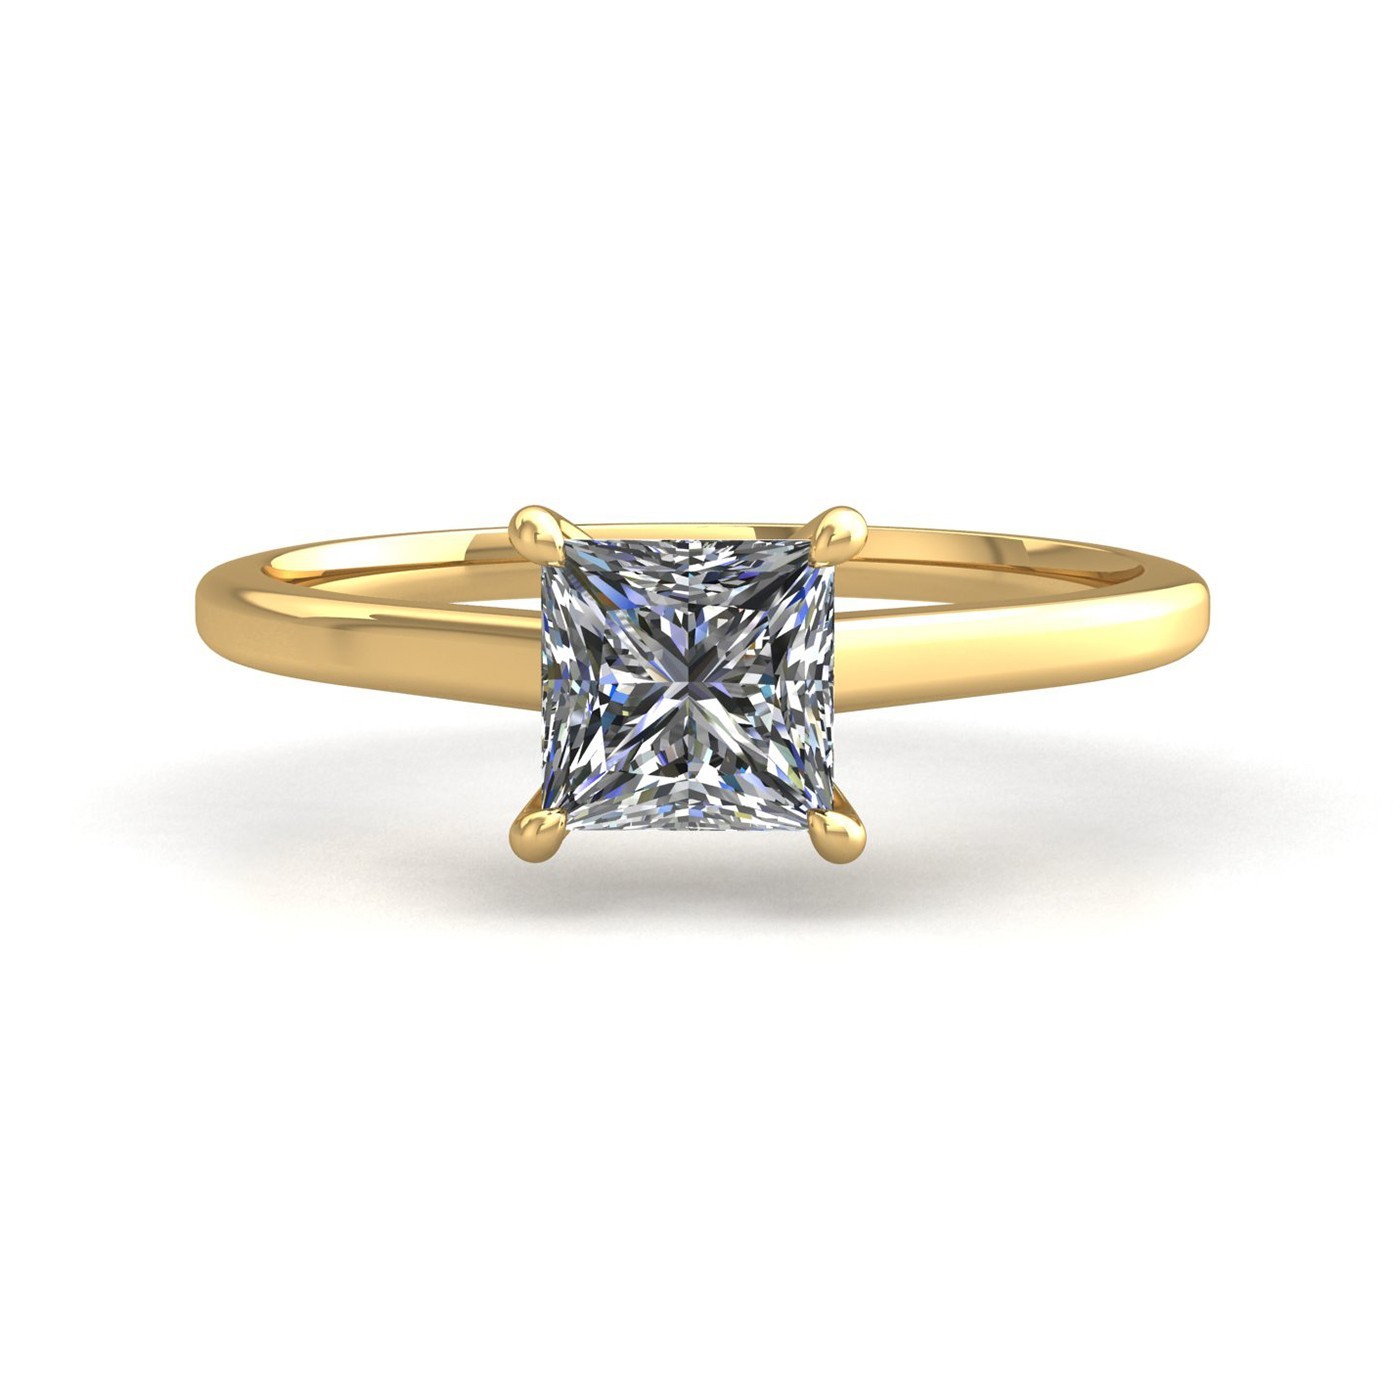 18k yellow gold  0,80 ct 4 prongs solitaire princess cut diamond engagement ring with whisper thin band Photos & images